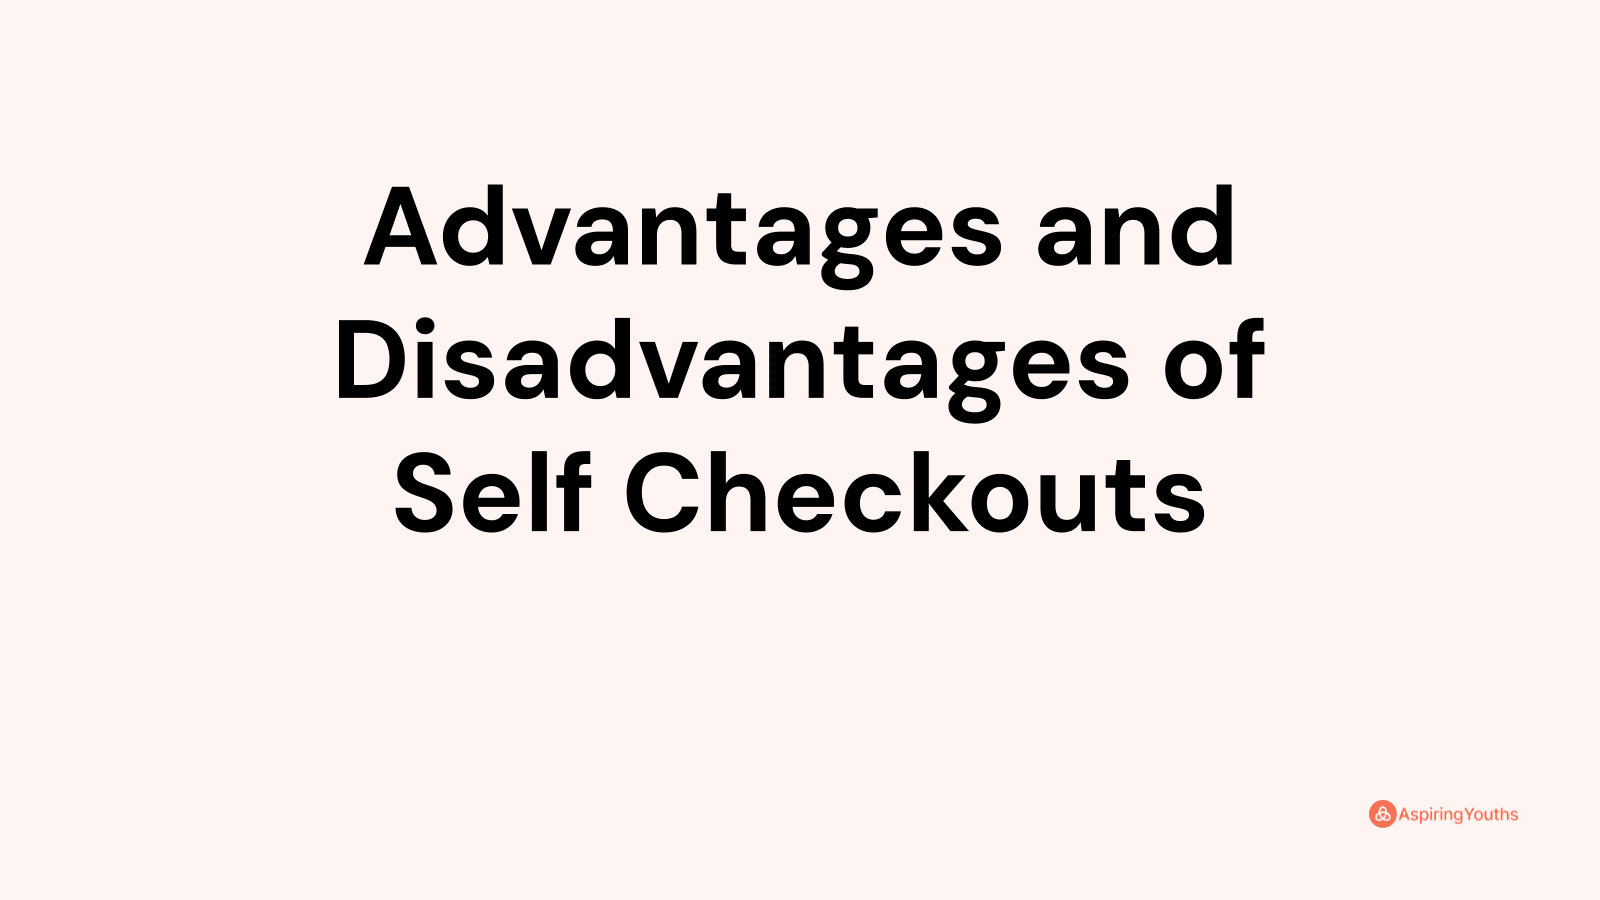 Advantages and disadvantages of Self Checkouts